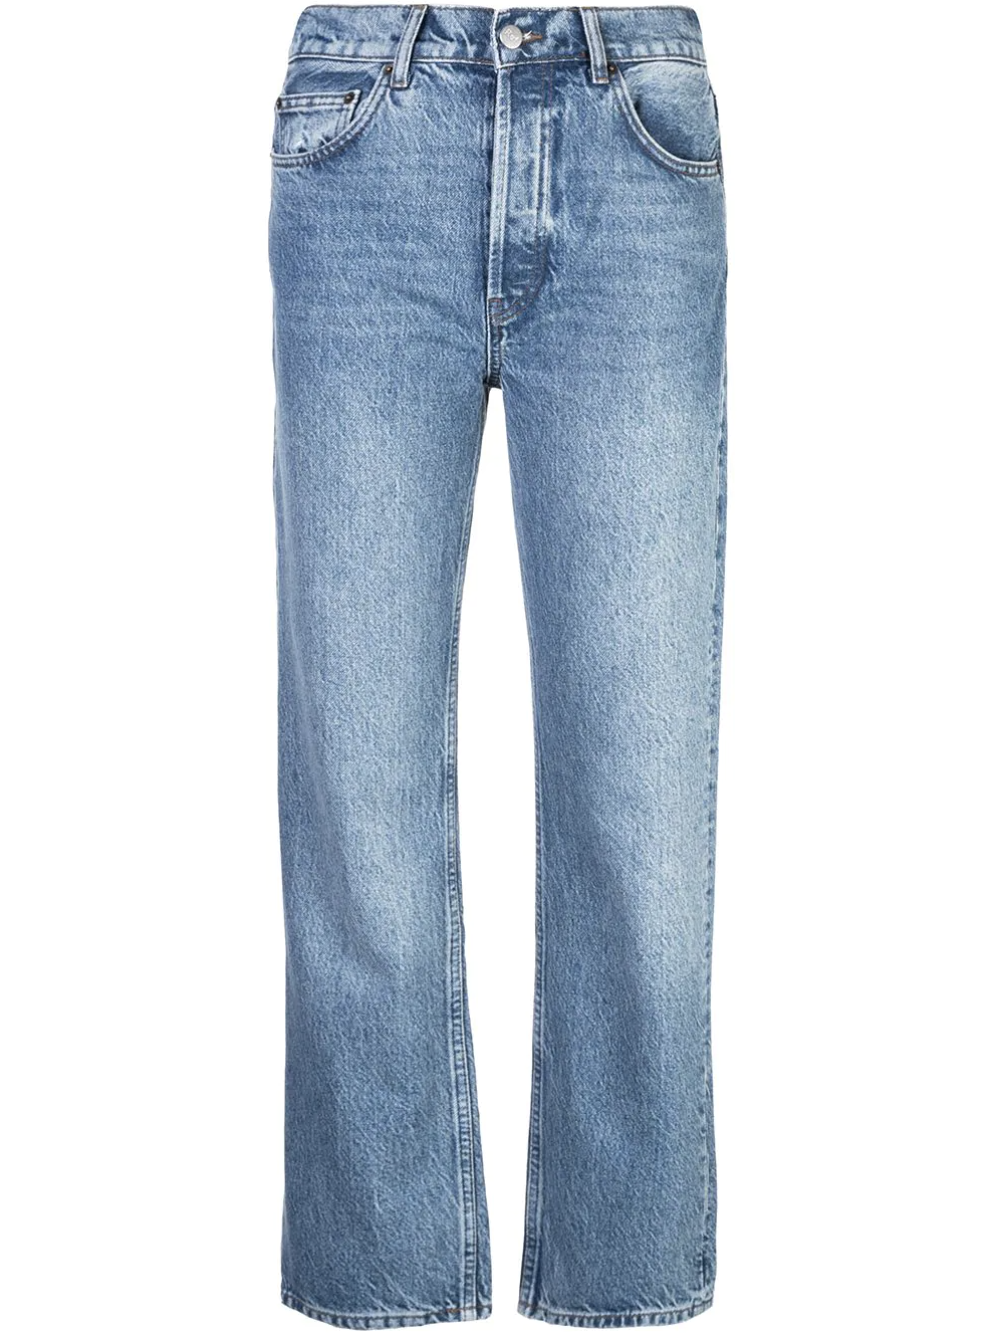 Reformation The Cynthia High Rise Straight Jeans